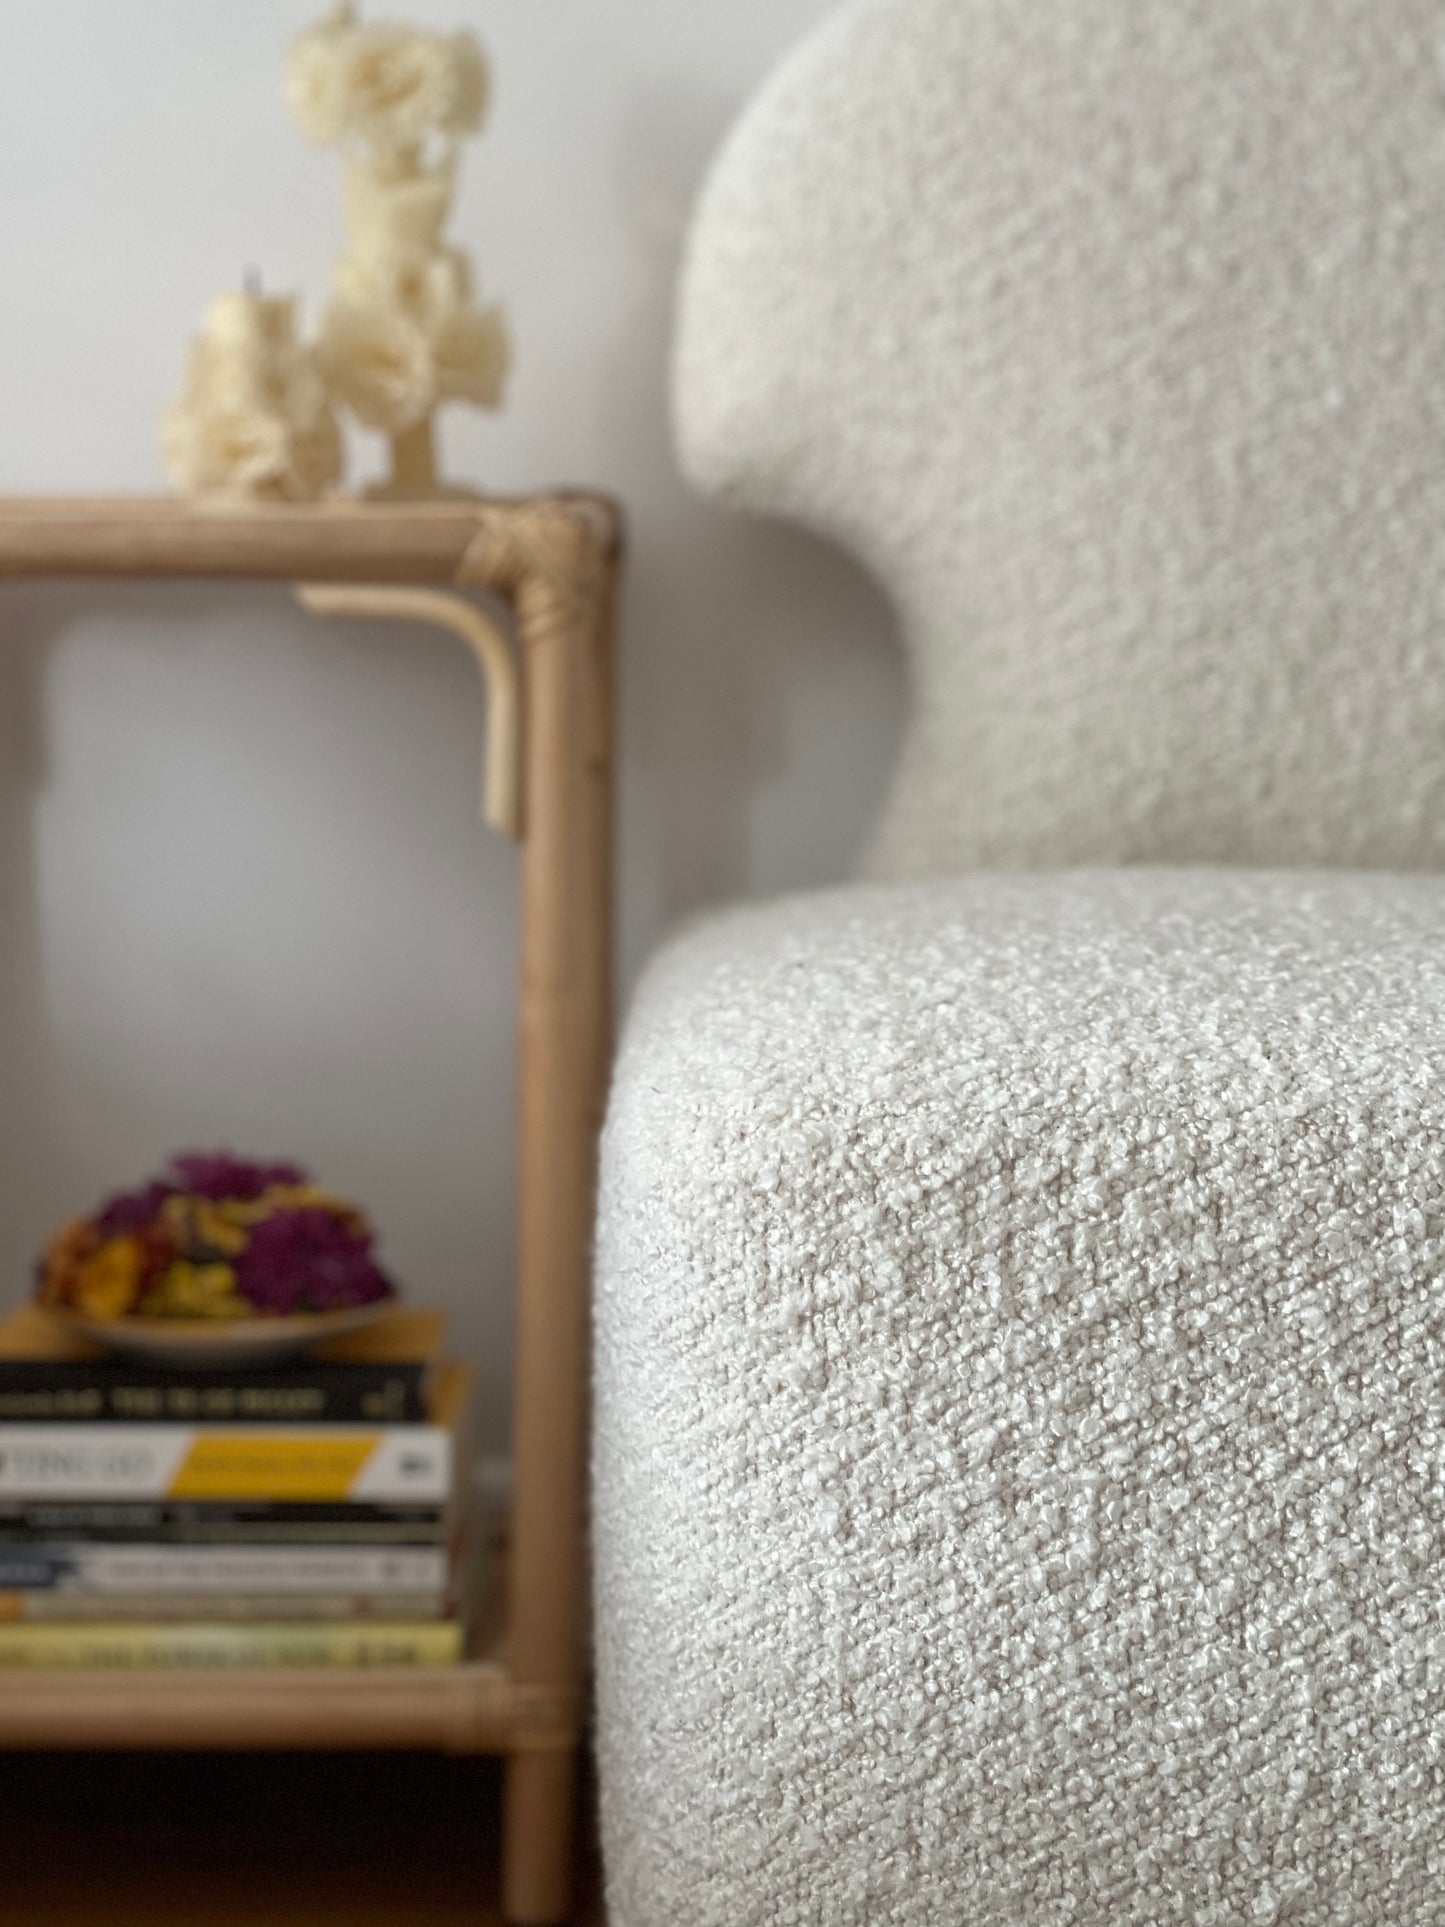 Close up of Salt-colored bouclé Meditation Chair by Rue and Williams Home. Modern design with no arms and a curved back, perfect for enhancing mindfulness practices and adding tranquility to any space. with table of objects next to it.